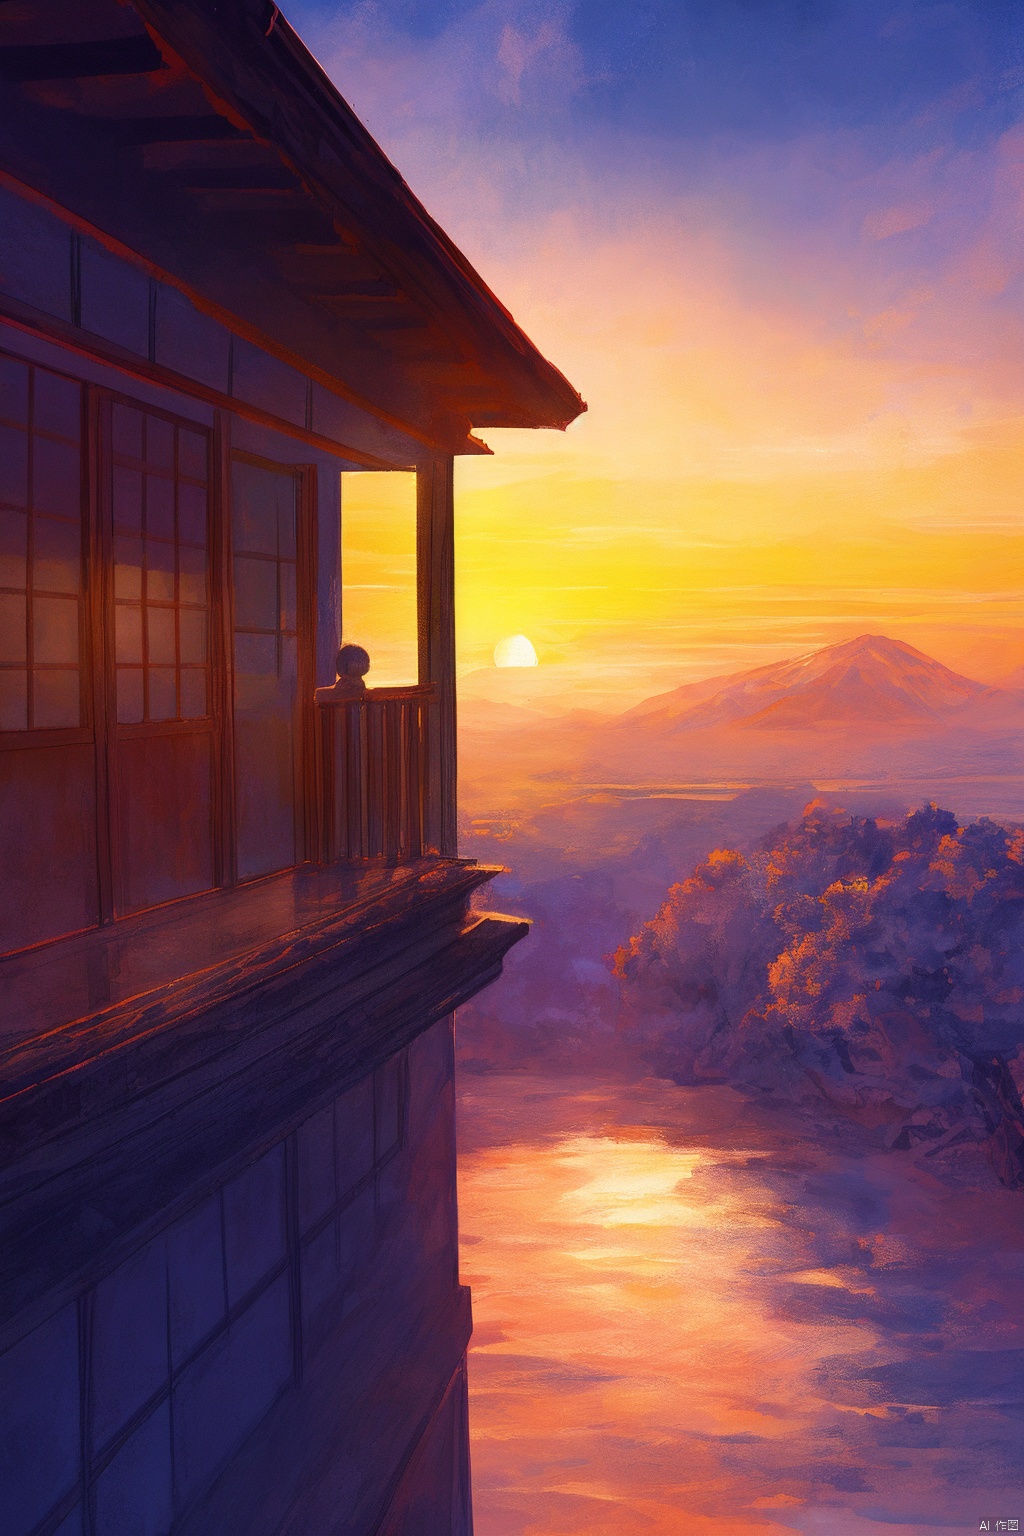 Sunset against the mountains, as day fades into twilight, the Yellow River meanders, flowing into the ocean's embrace. A traveler, standing on the ancient pagoda's balcony, yearns for an even broader sight, deciding to ascend another level. The scene portrays the poetic fusion of natural landscapes—vibrant orange and pink hues painting the sky, the river's shimmering surface reflecting the last light of day. The architecture is intricate, showcasing the pagoda's wooden structure and carved balustrades under the soft glow of lanterns. (sunset glow:1.5), mountain silhouette:1.3, yellow river's curve:1.4, vast sea horizon:1.2, traditional pagoda:1.3, ascending stairs:1.1, traveler's anticipation:1.2, (warm lighting:1.4) The composition encapsulates the poem's philosophical depth, inspiring the viewer to seek greater heights for broader perspectives, both literally and metaphorically.